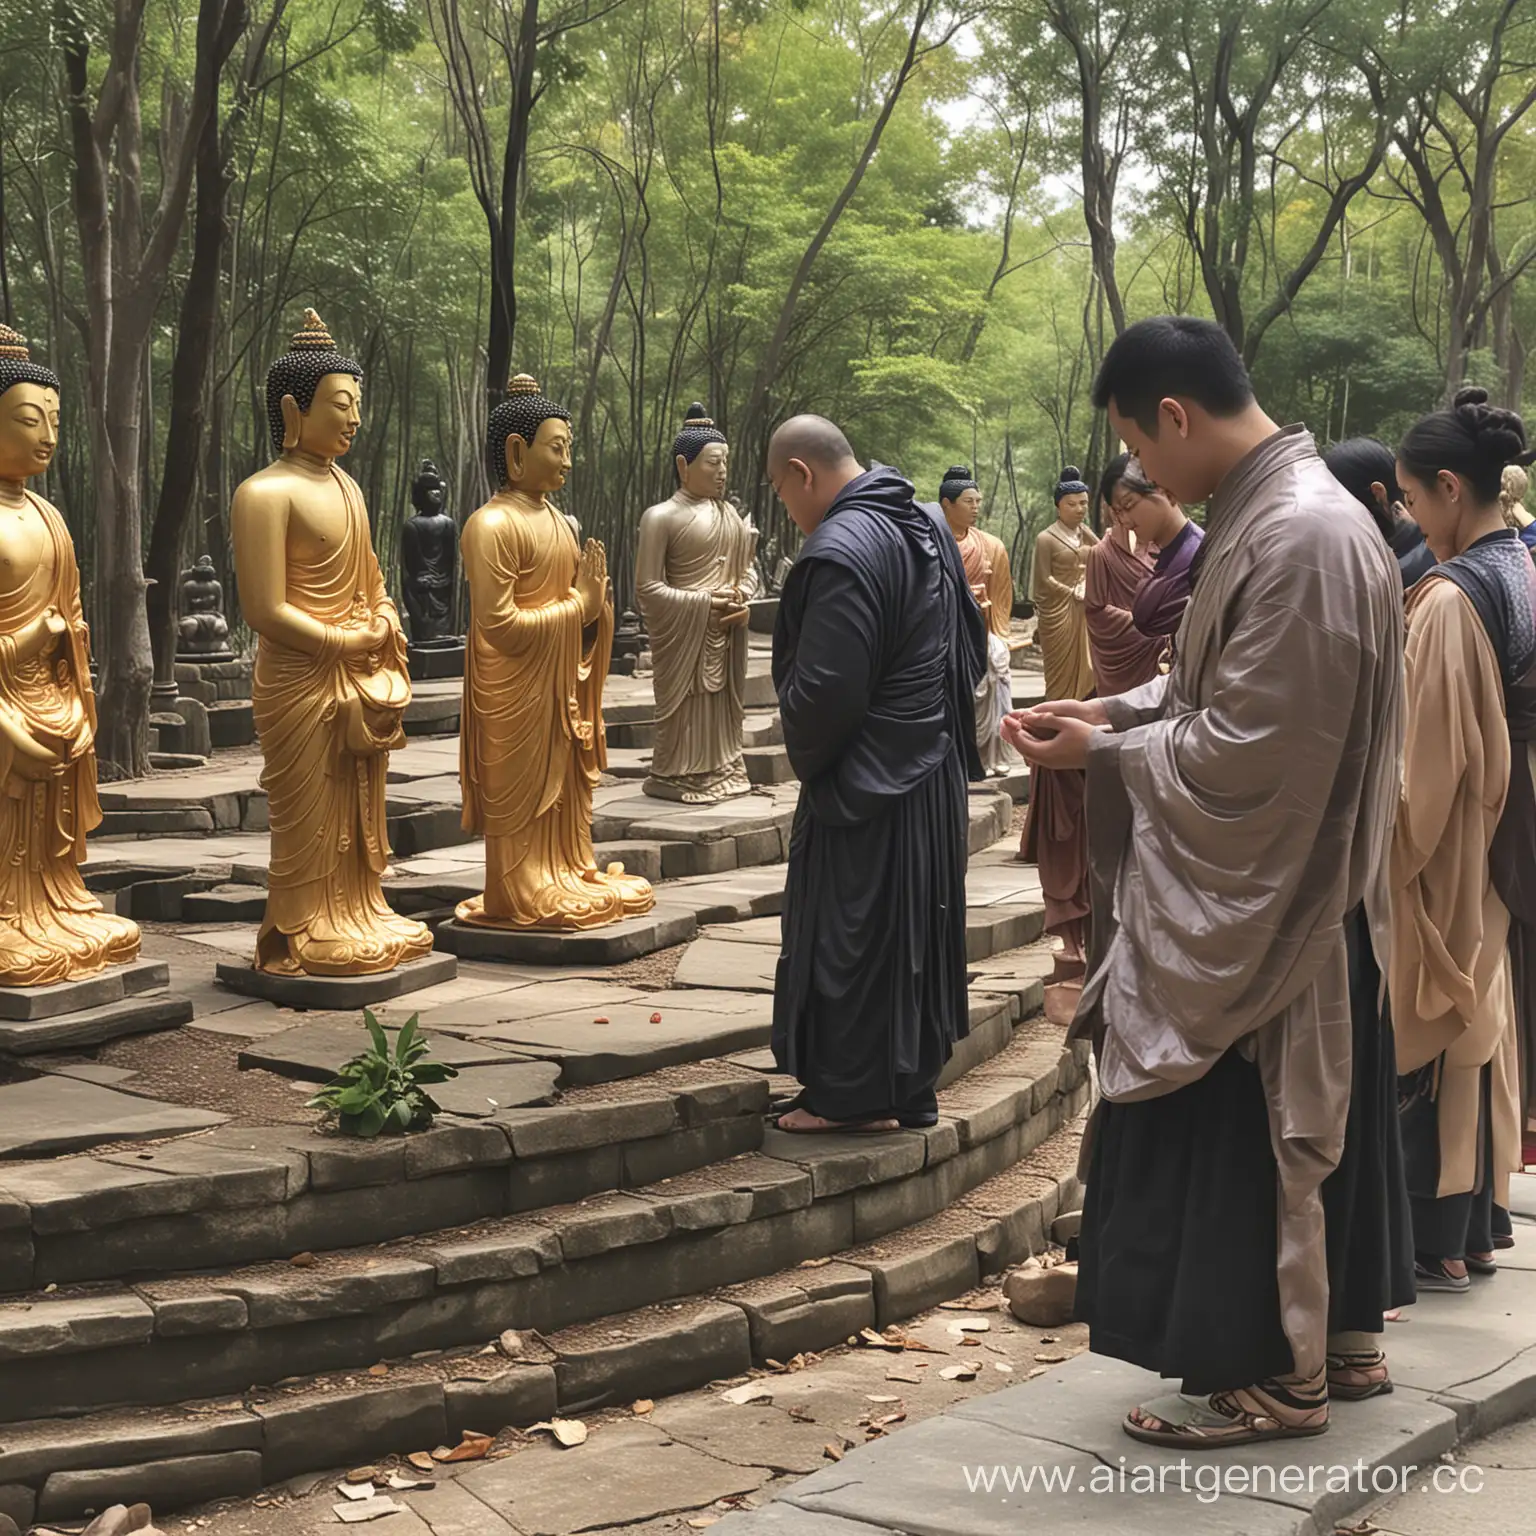 Respectful-Bowing-to-Parents-Teachers-and-Buddhas